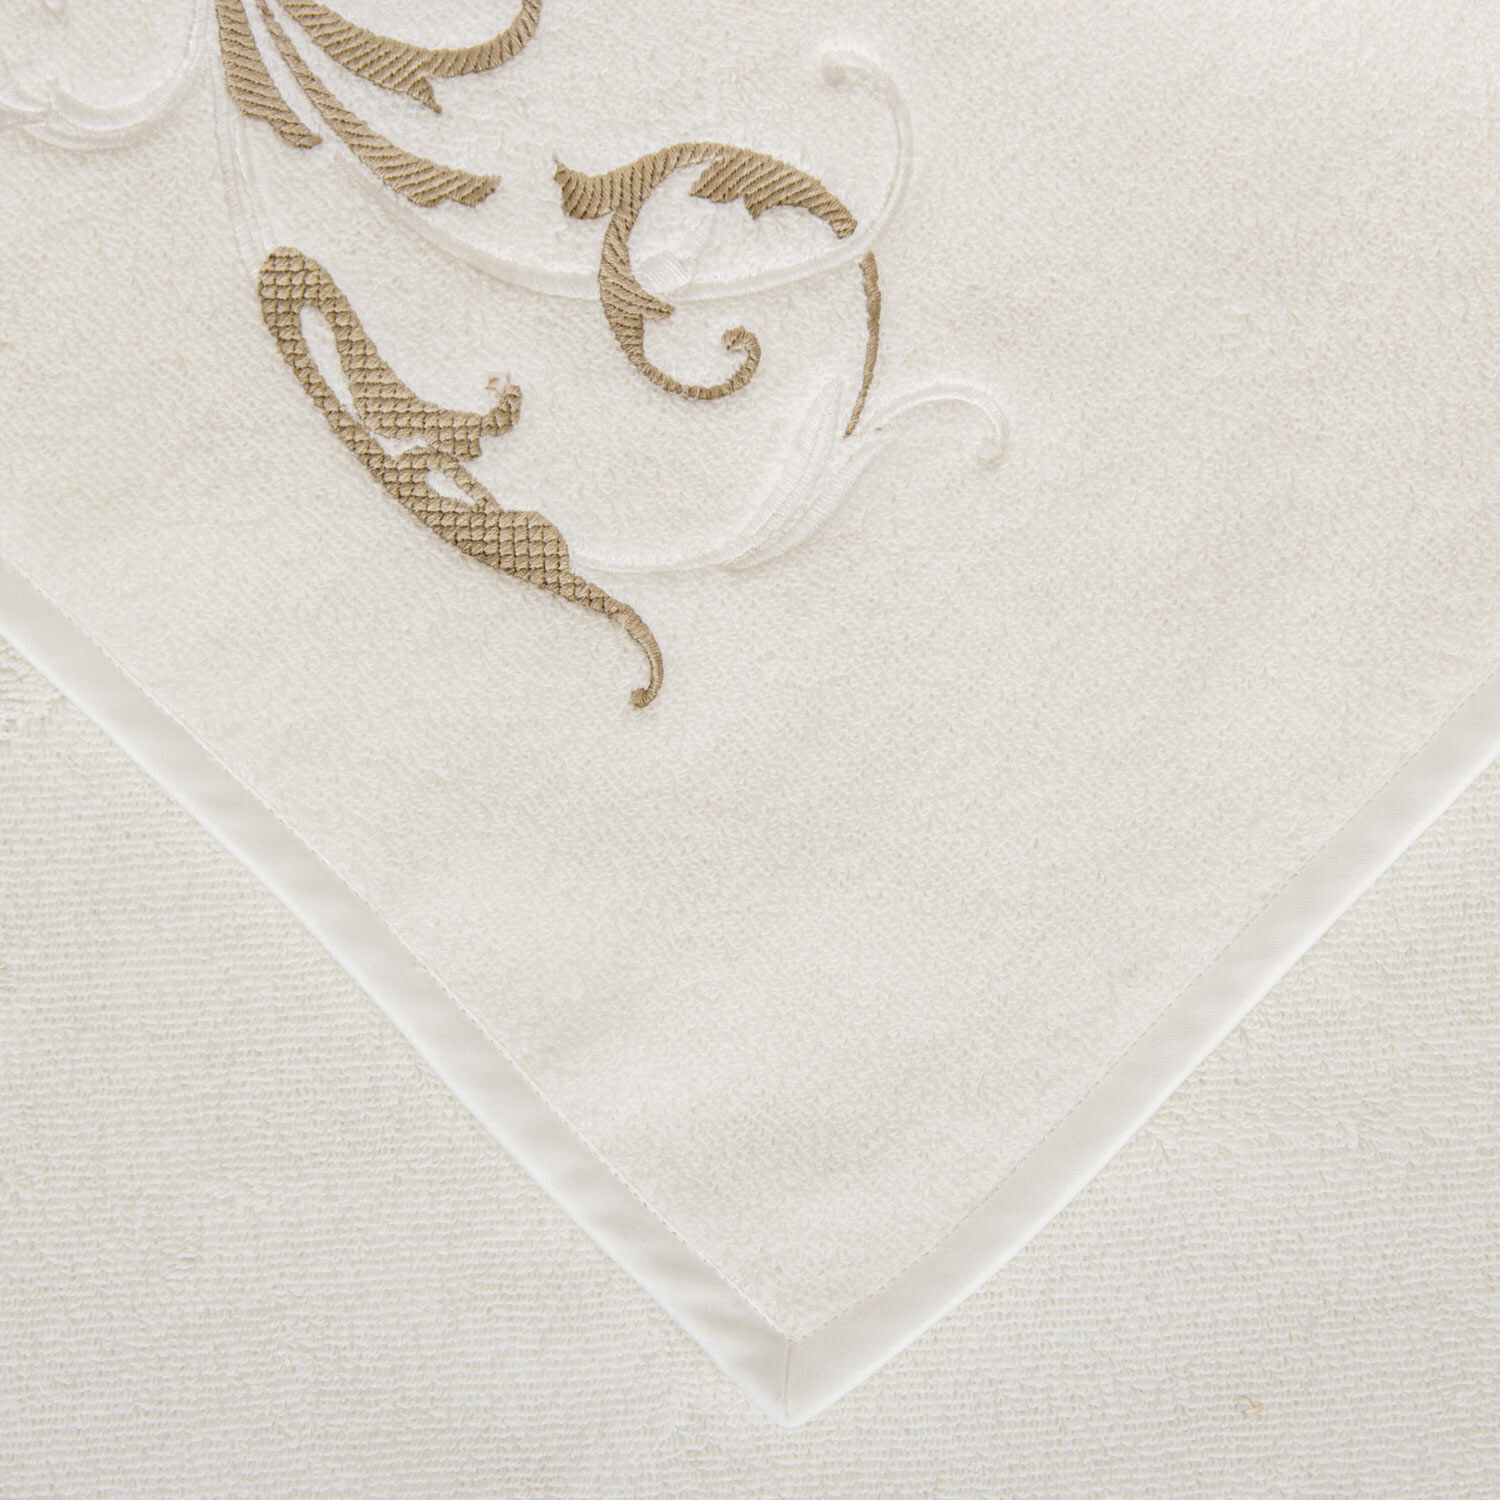 slide 2 Tracery Embroidered Bath Sheet 